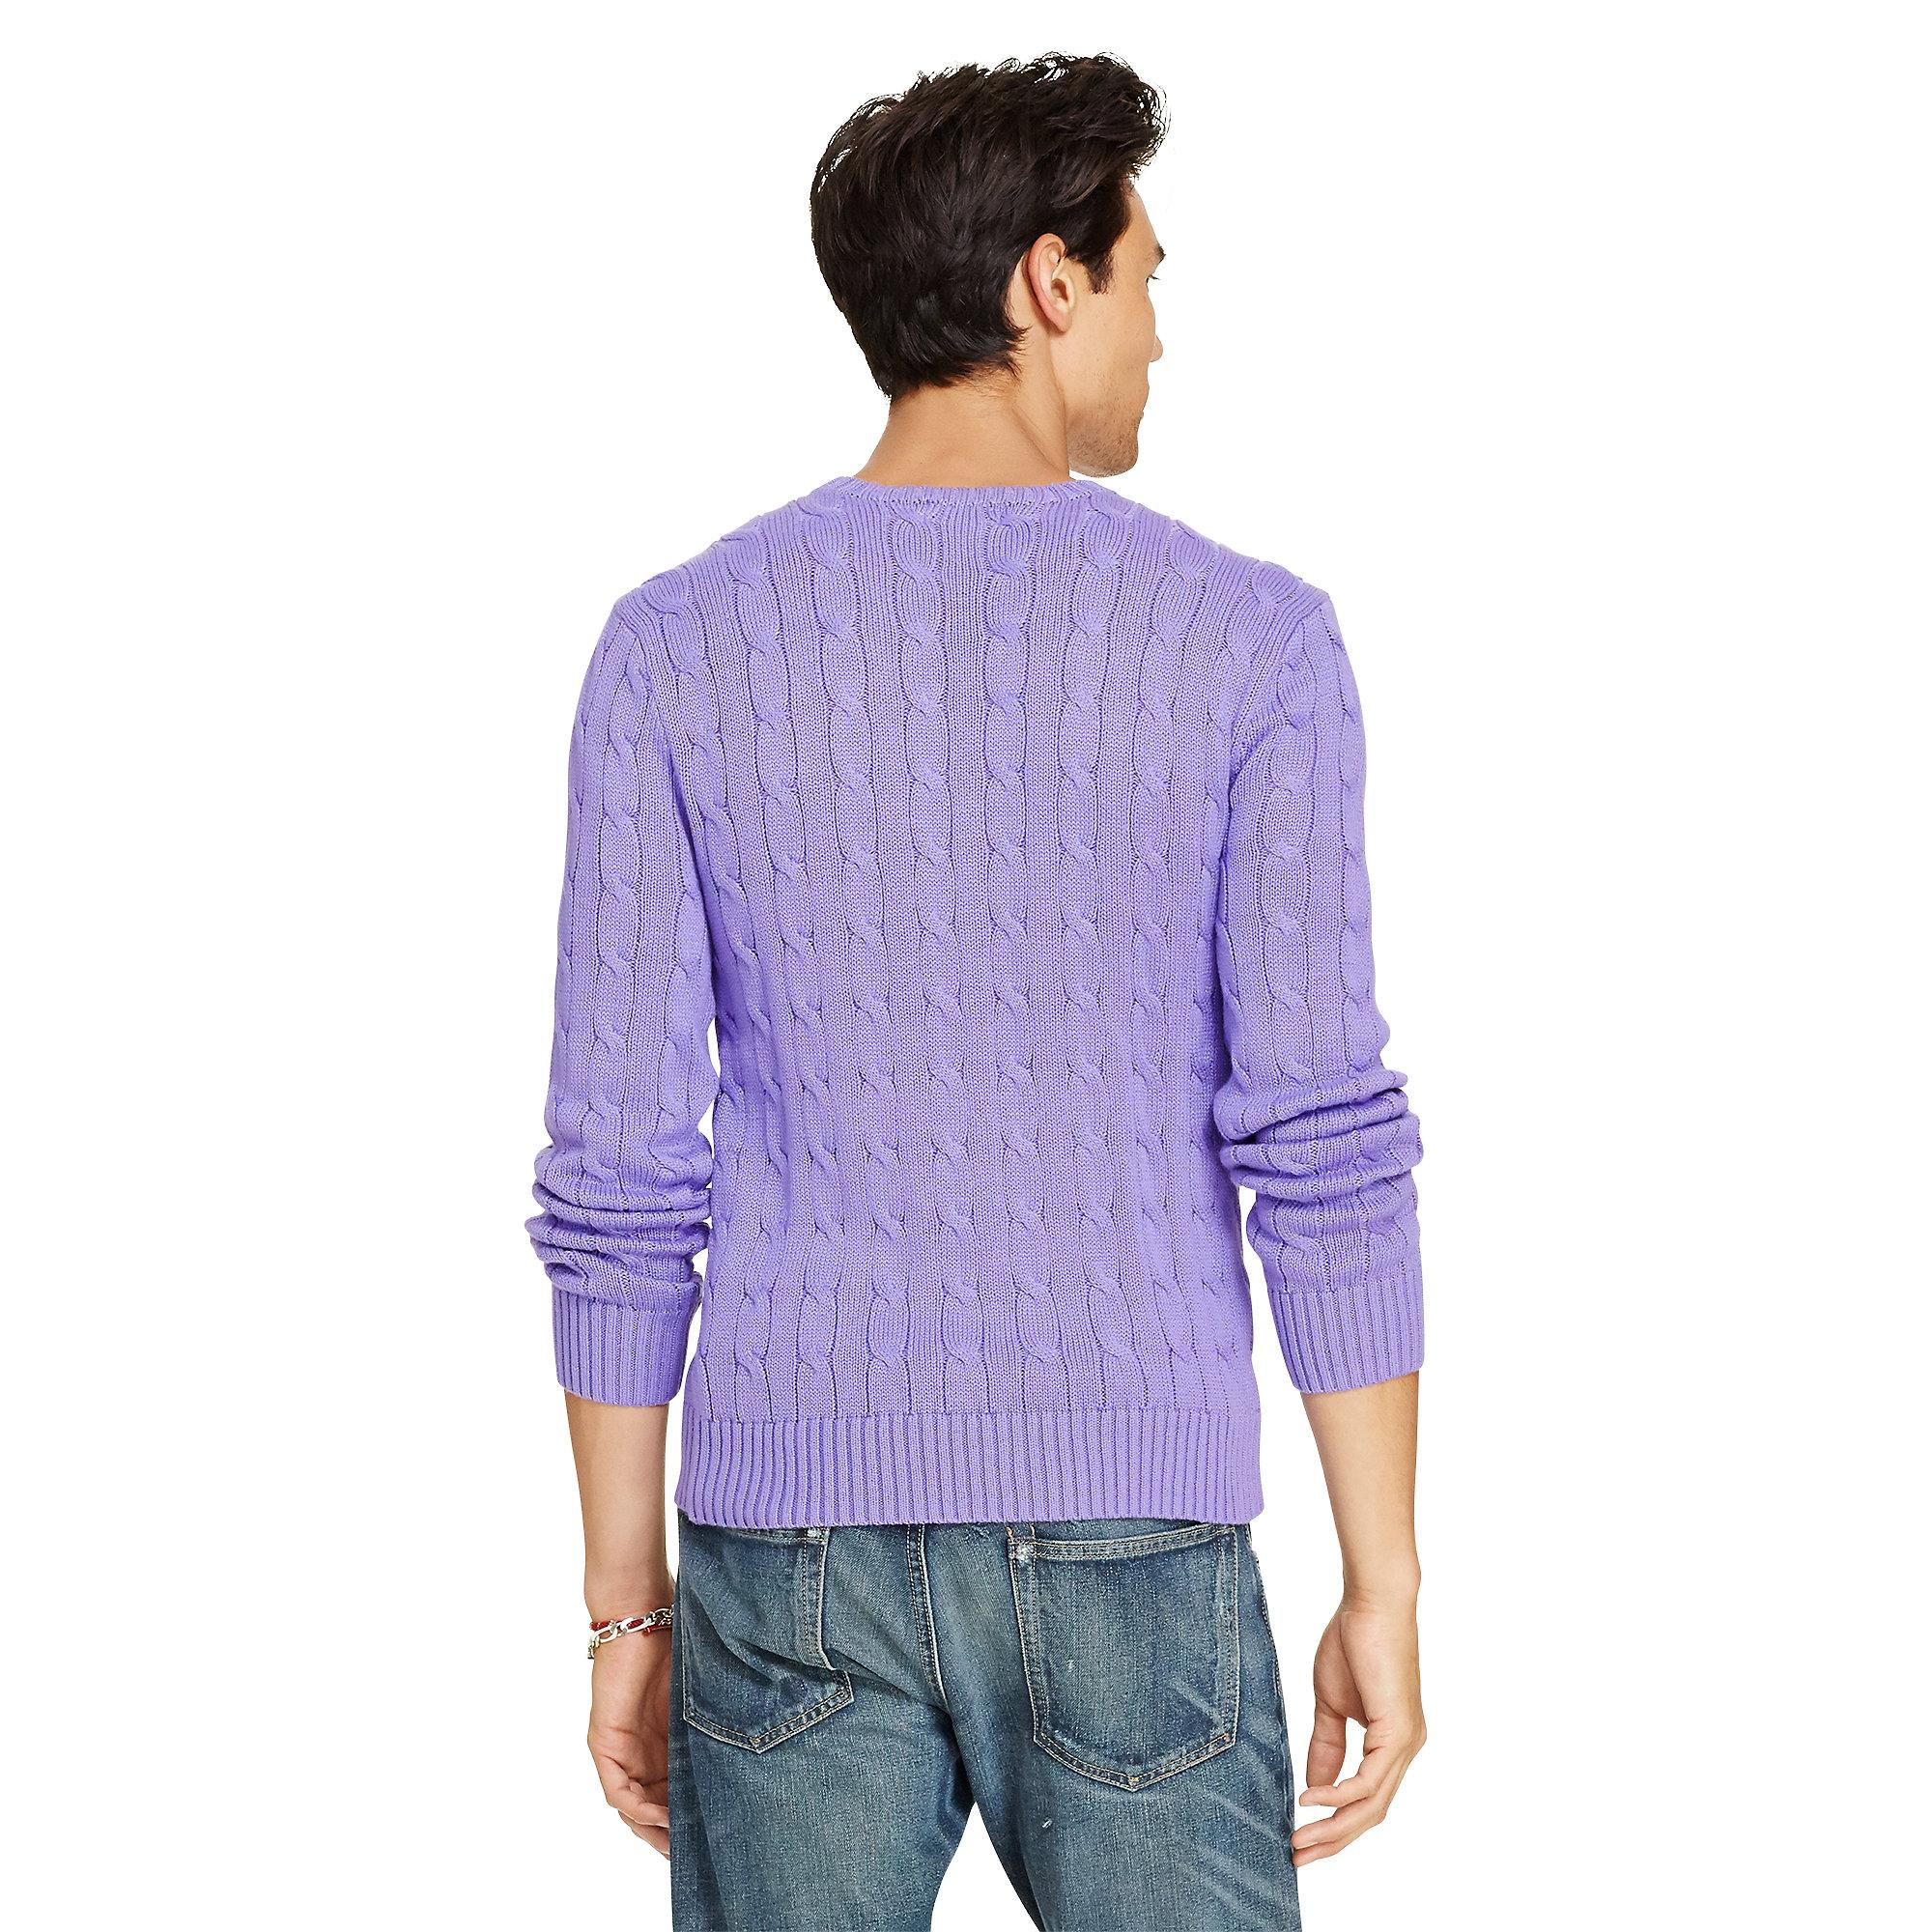 Polo Ralph Lauren Cable-knit Cotton Sweater in Purple for Men - Lyst